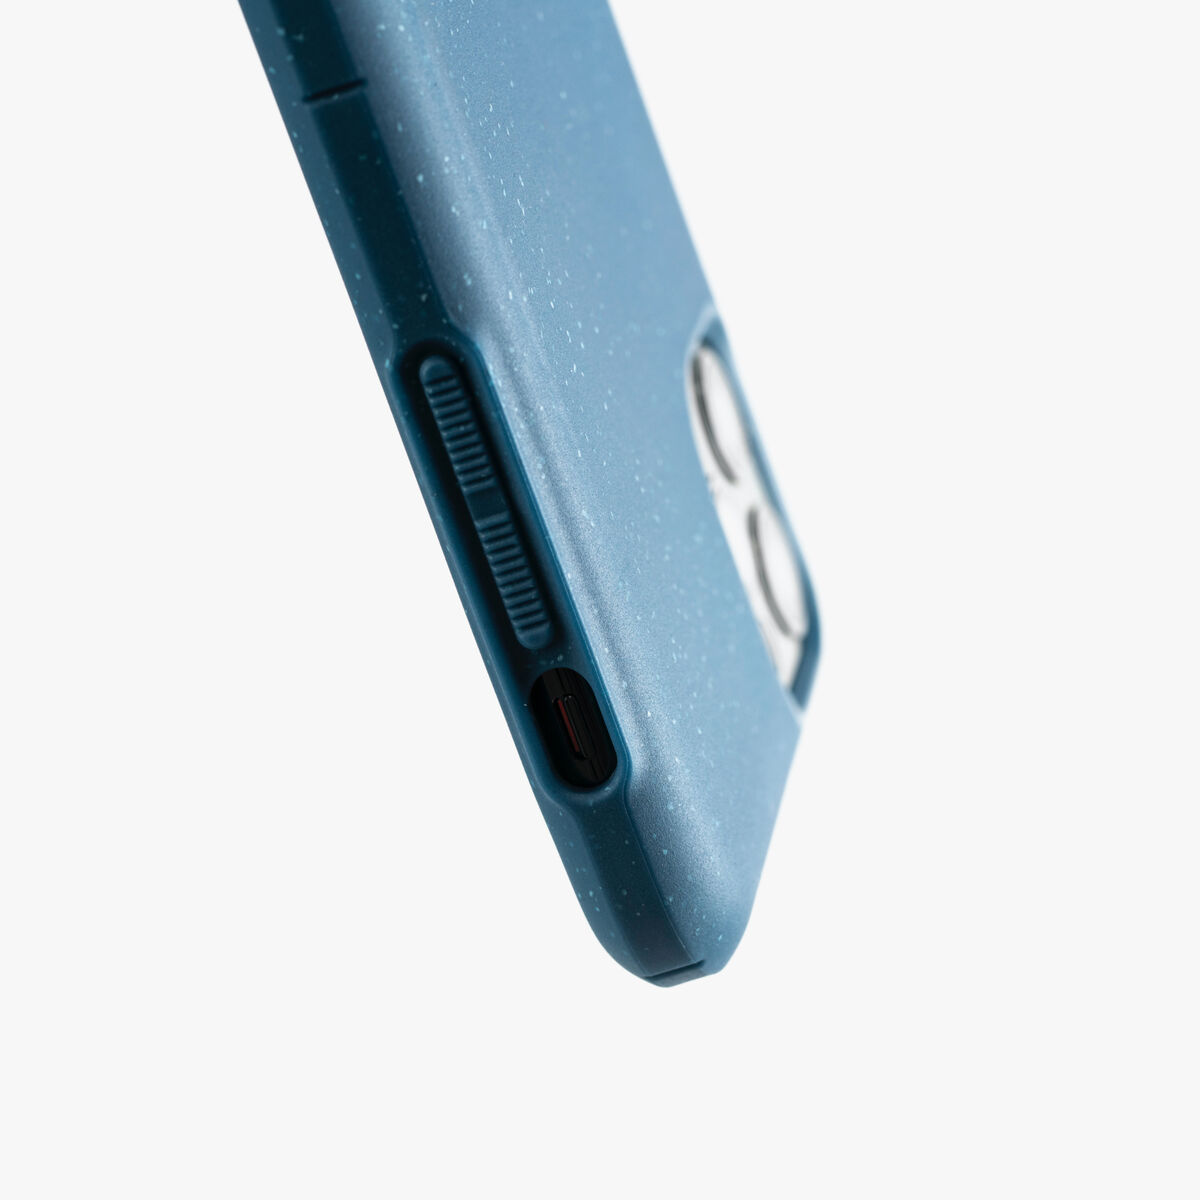 Moab Case (Marine Blue) for Apple iPhone 11 / Xr,, large